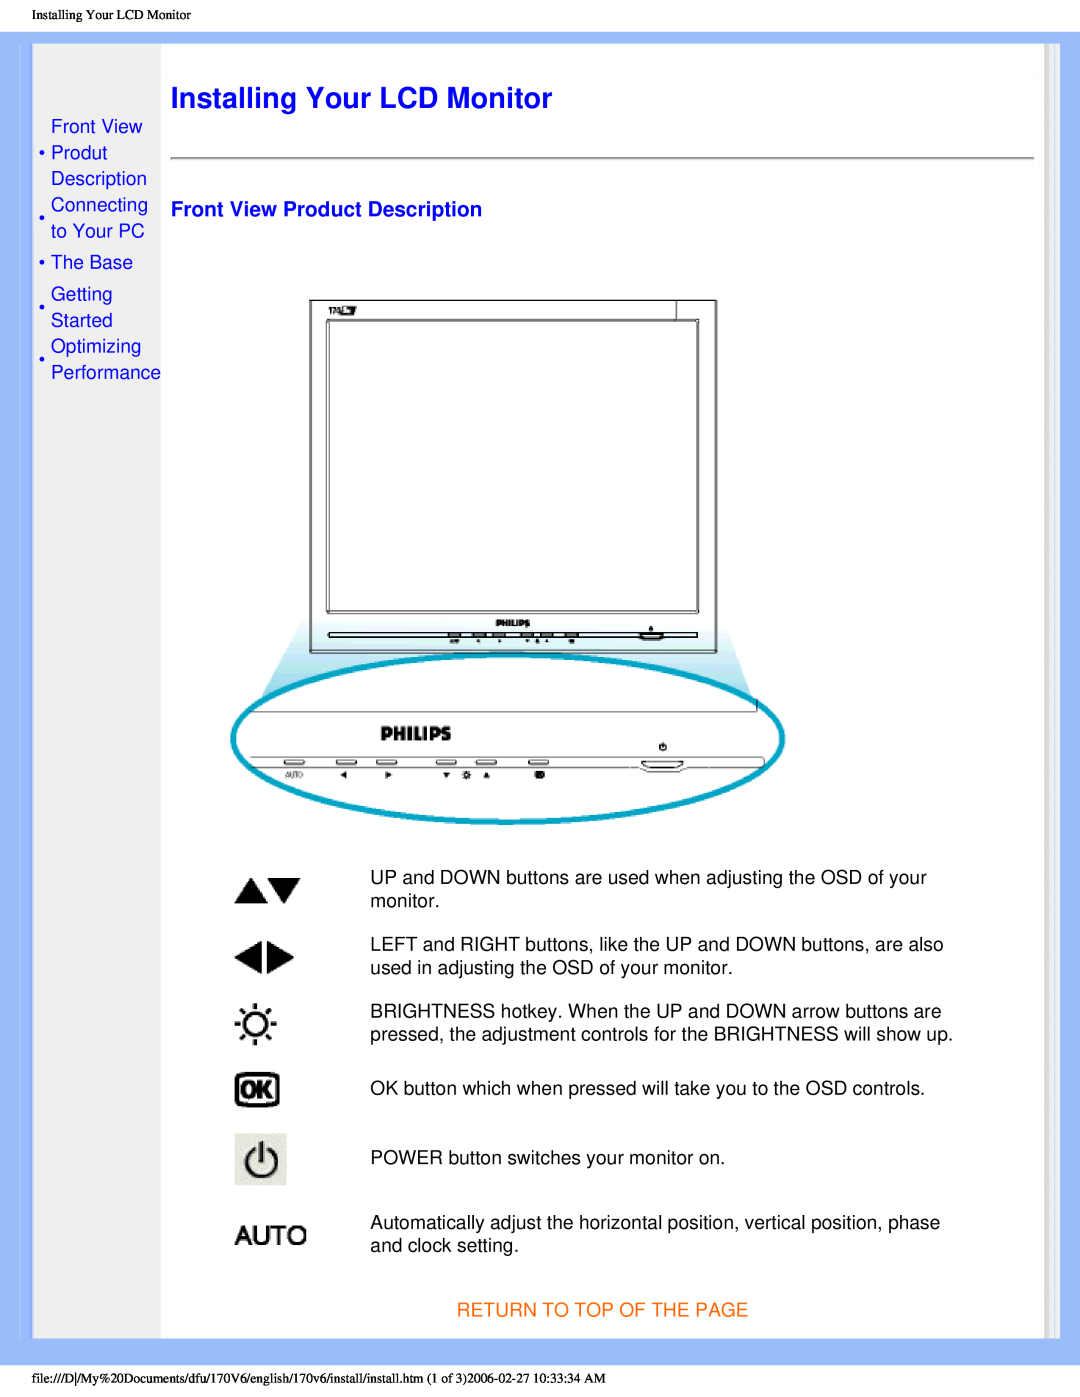 Philips 170V6 user manual Installing Your LCD Monitor, Front View Product Description, Front View Produt Description 